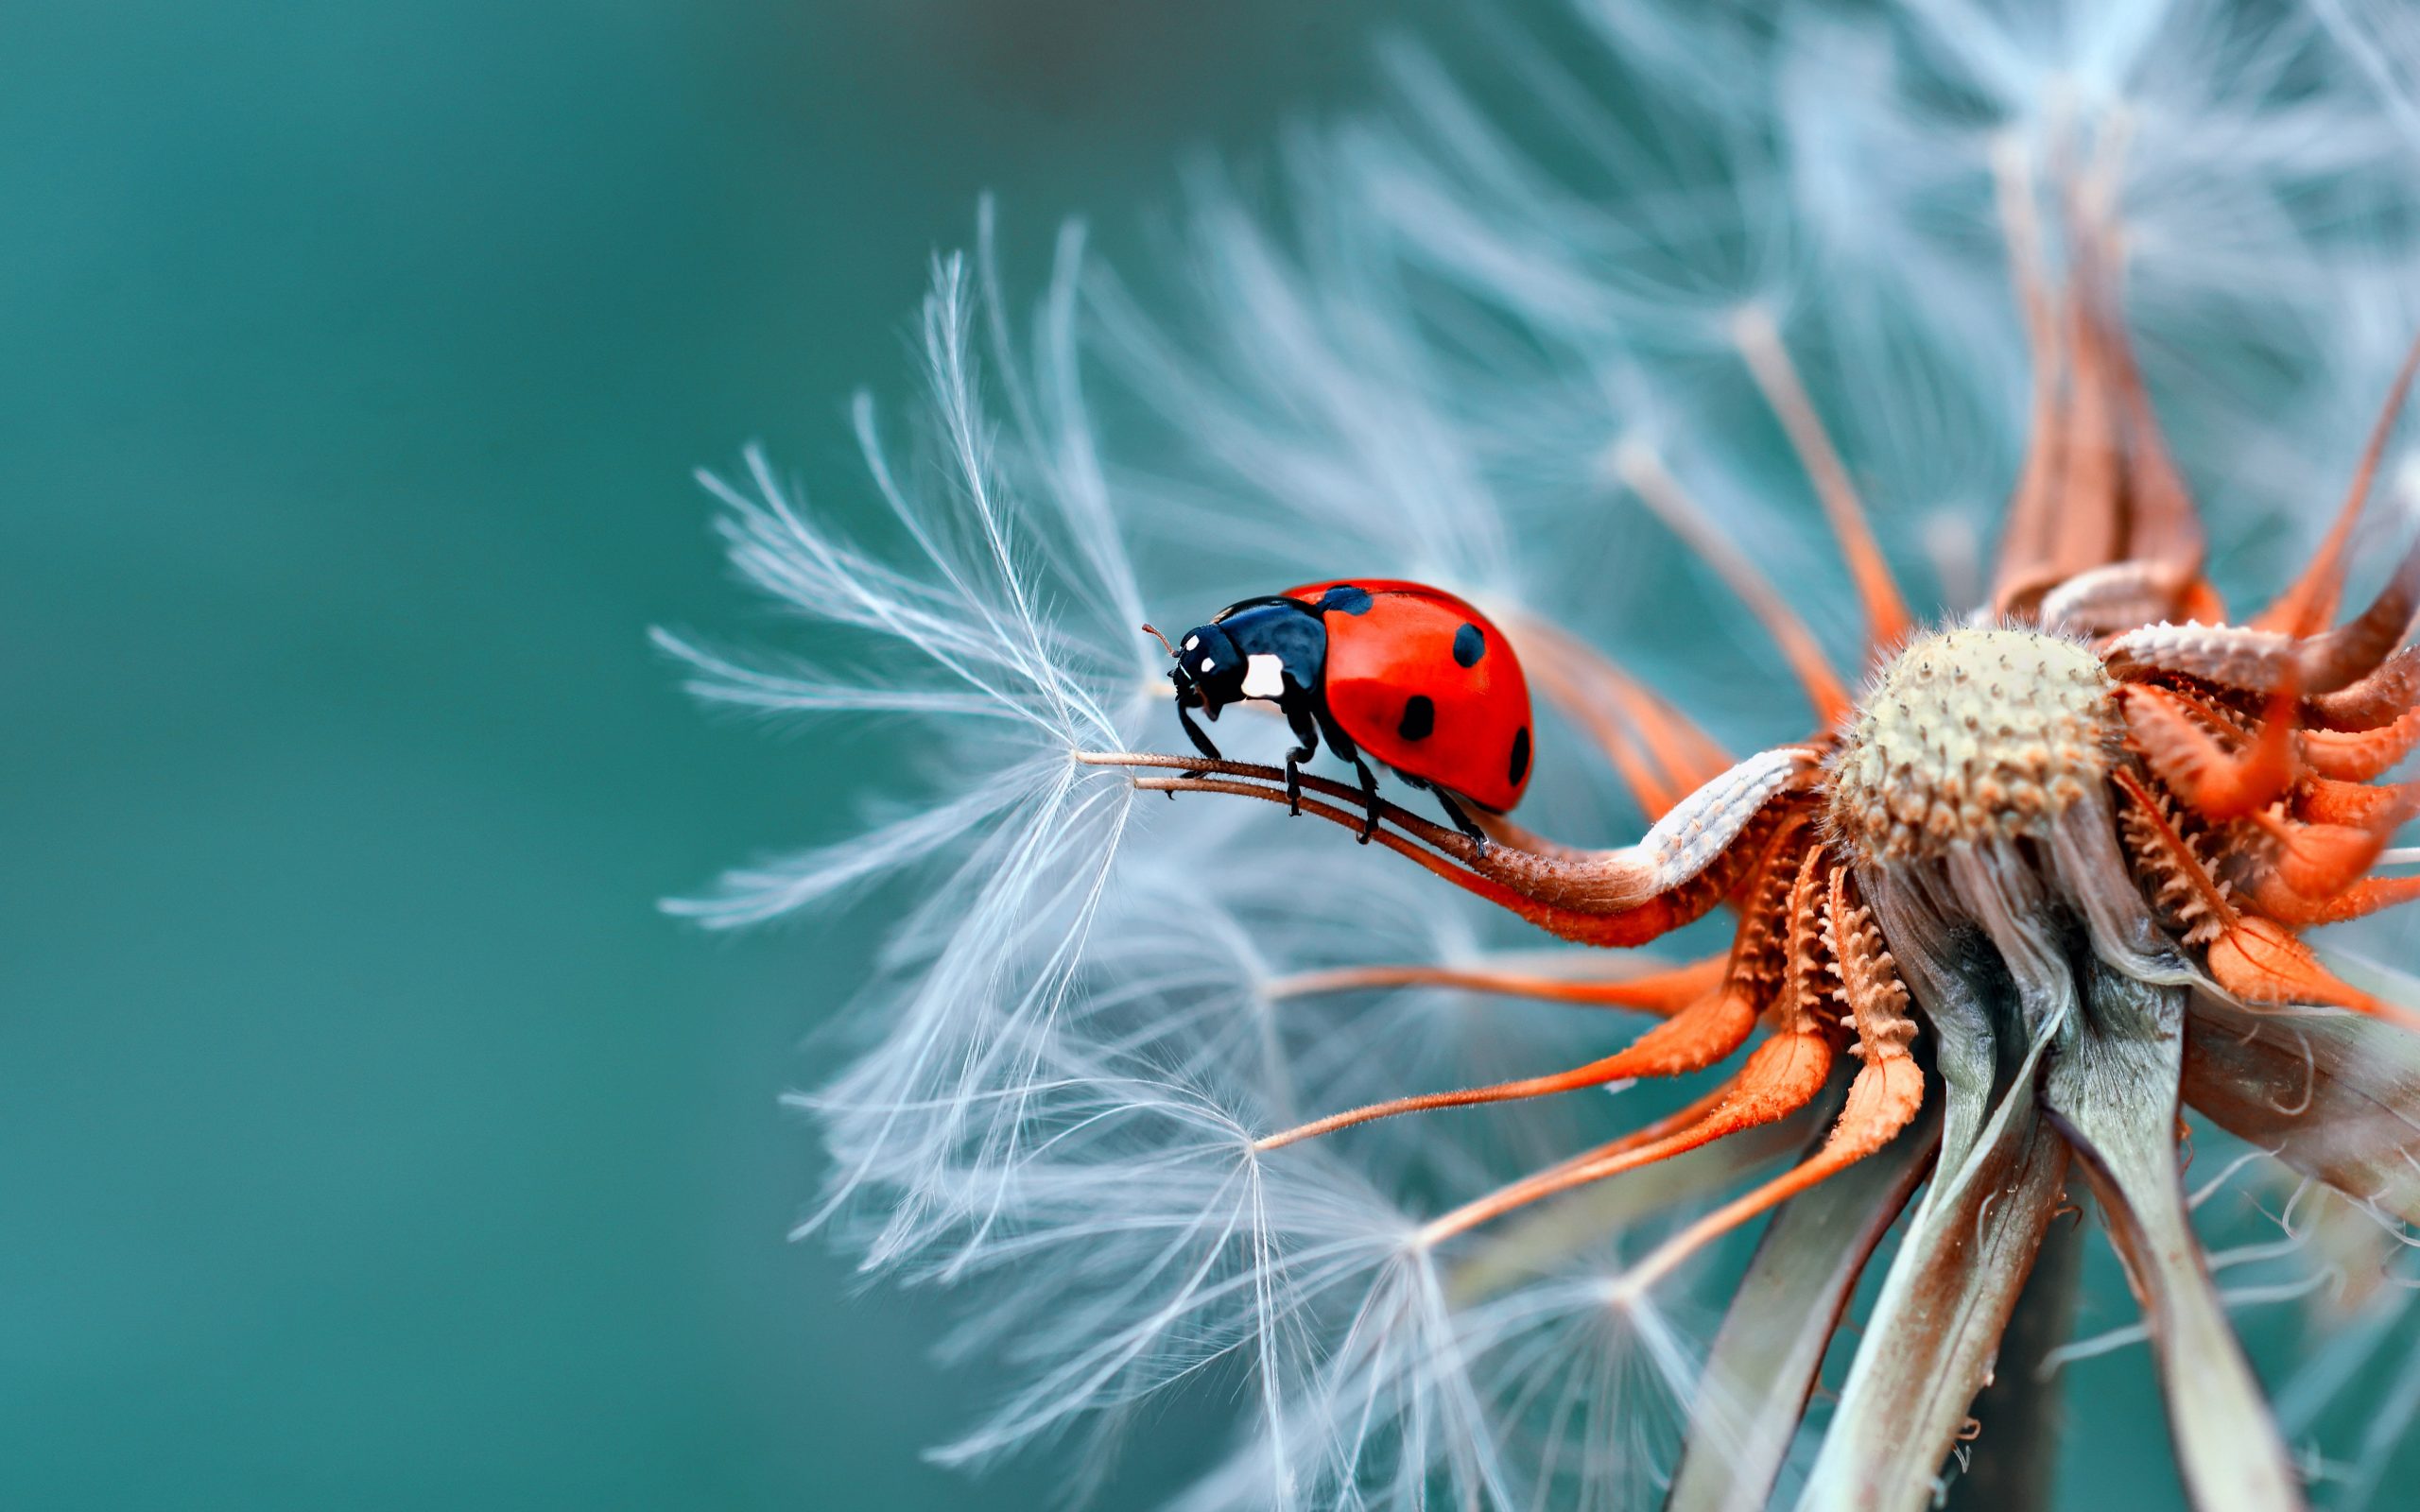 Insect Bubamara On Dandelion Macro Photography Ultra Hd Wallpapers For Desktop Mobile Phones And Laptop 3840×2400